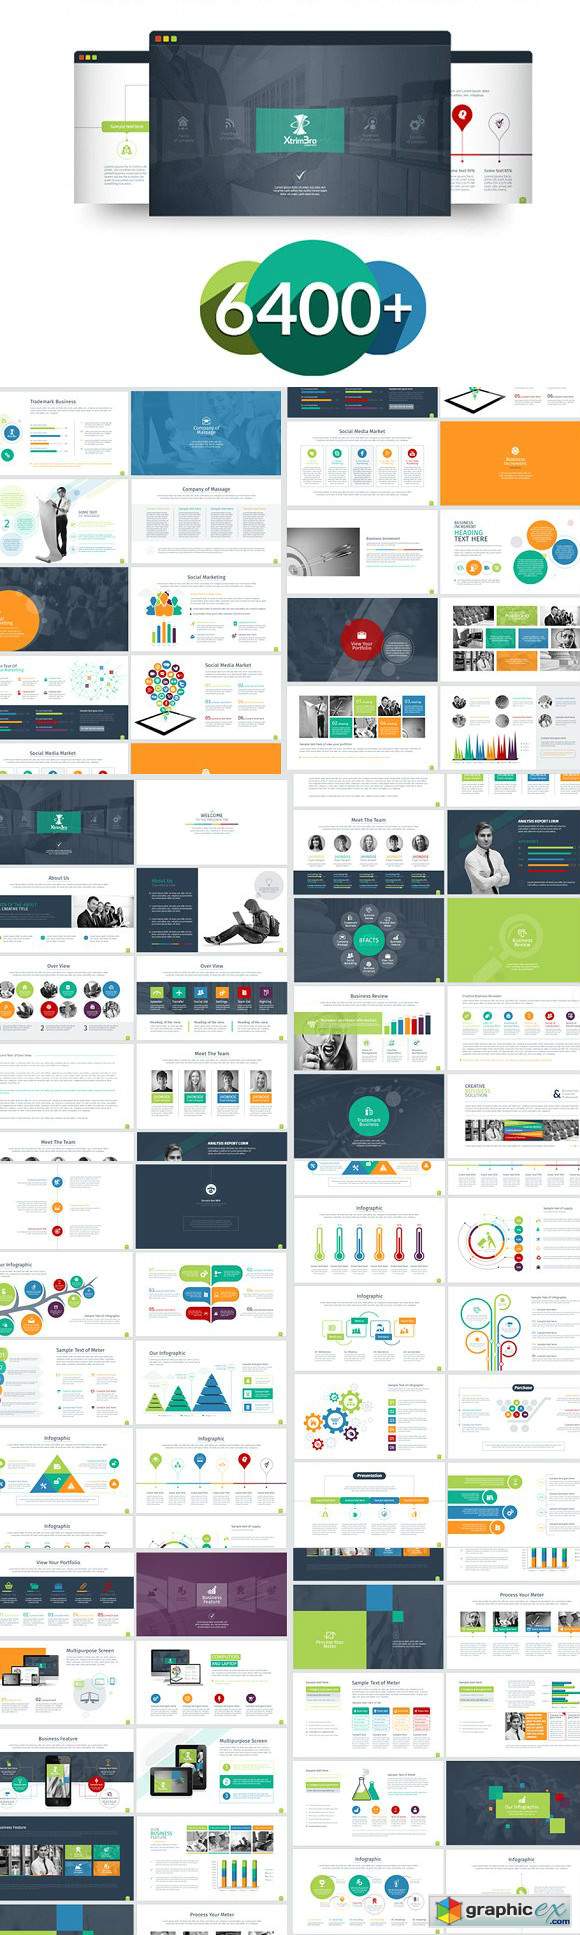 Infographic PowerPoint Template 2347953